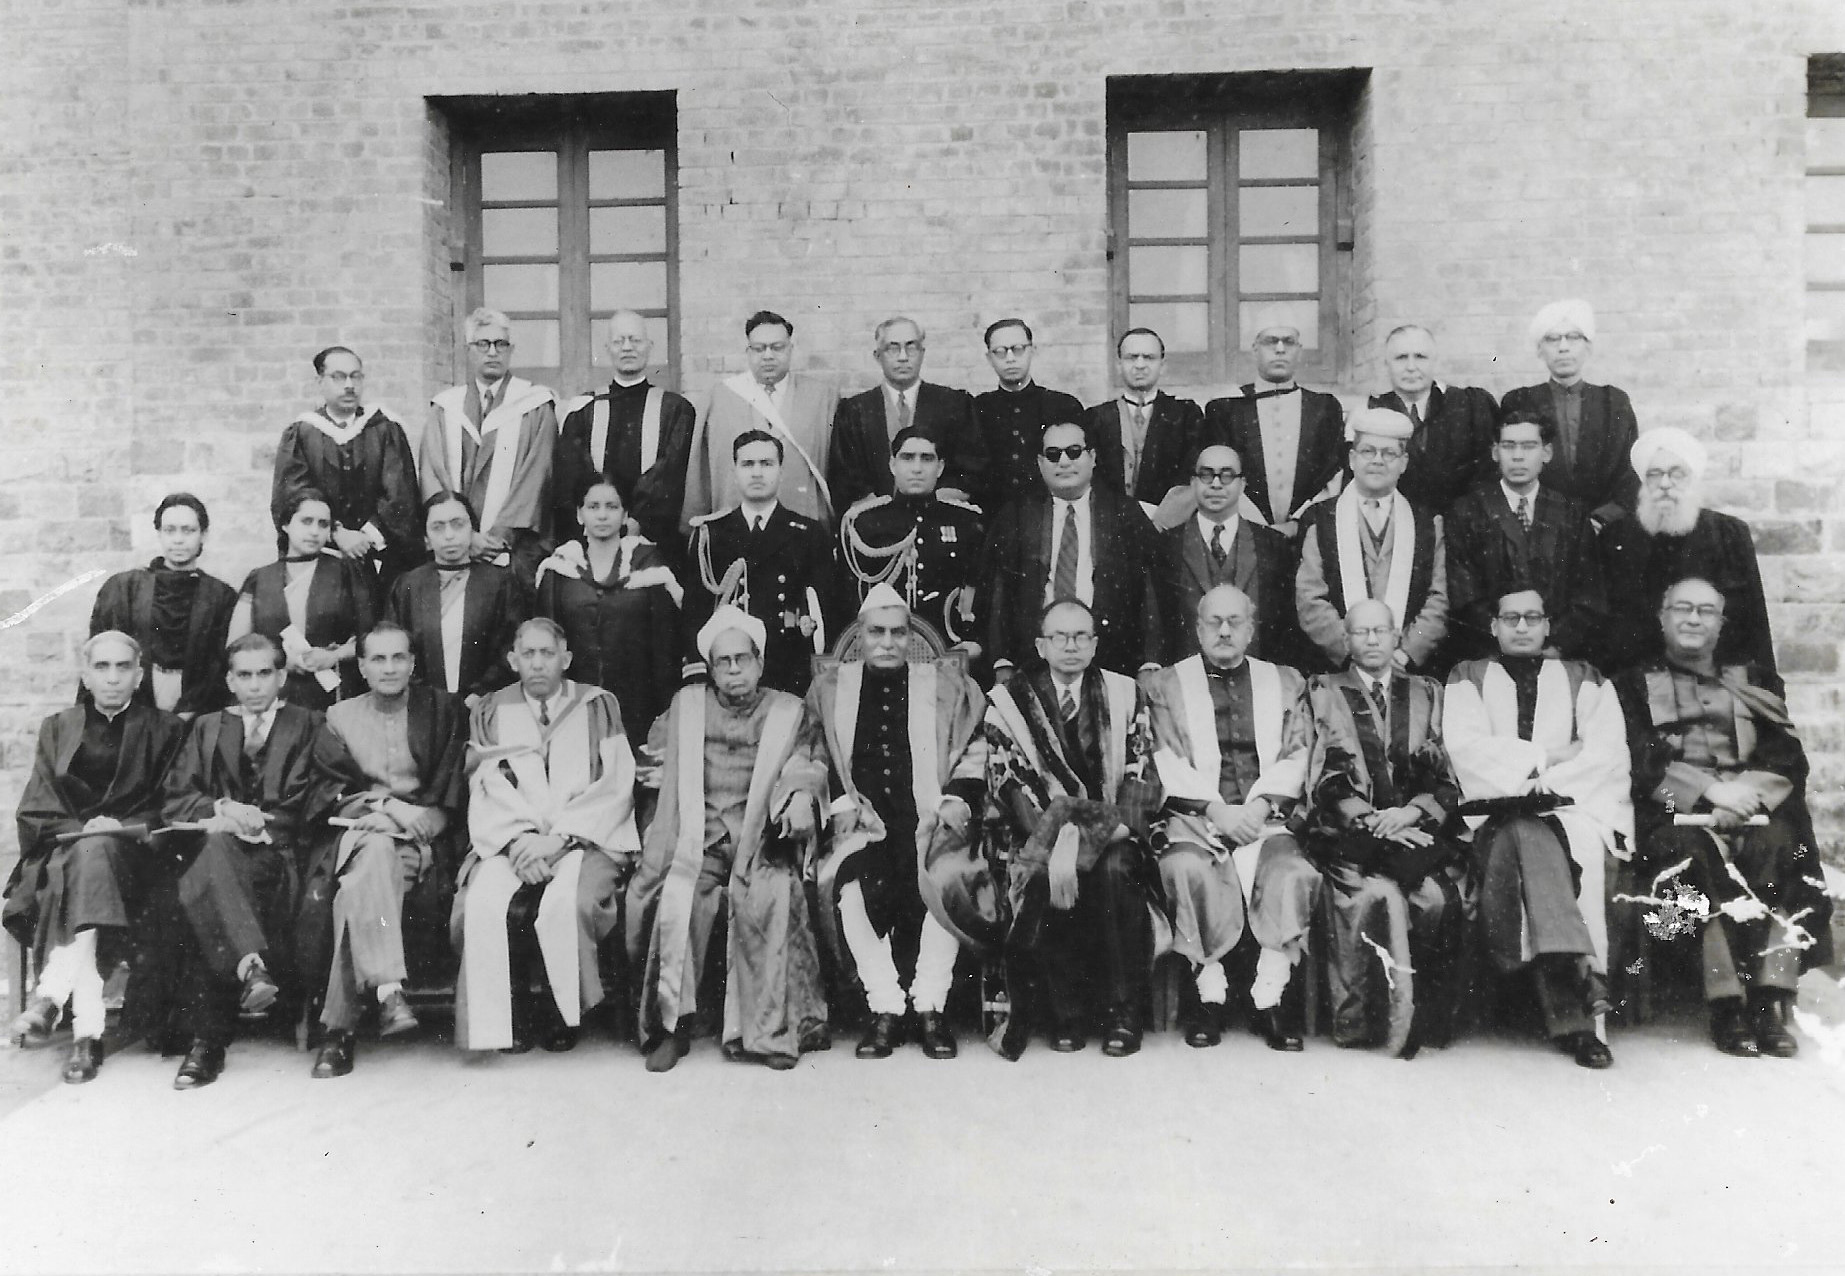 Delhi University Convocation delegates - After the Constitution of India was ratified on Jan 26, 1950, two persons were awarded Honorary Doctorates at the Convocation of the University of Delhi in Nov 1951. They were the President of India Rajendra Prasad (seated in the Center), and Sir Alladi Krishnaswami Iyer (to his left)